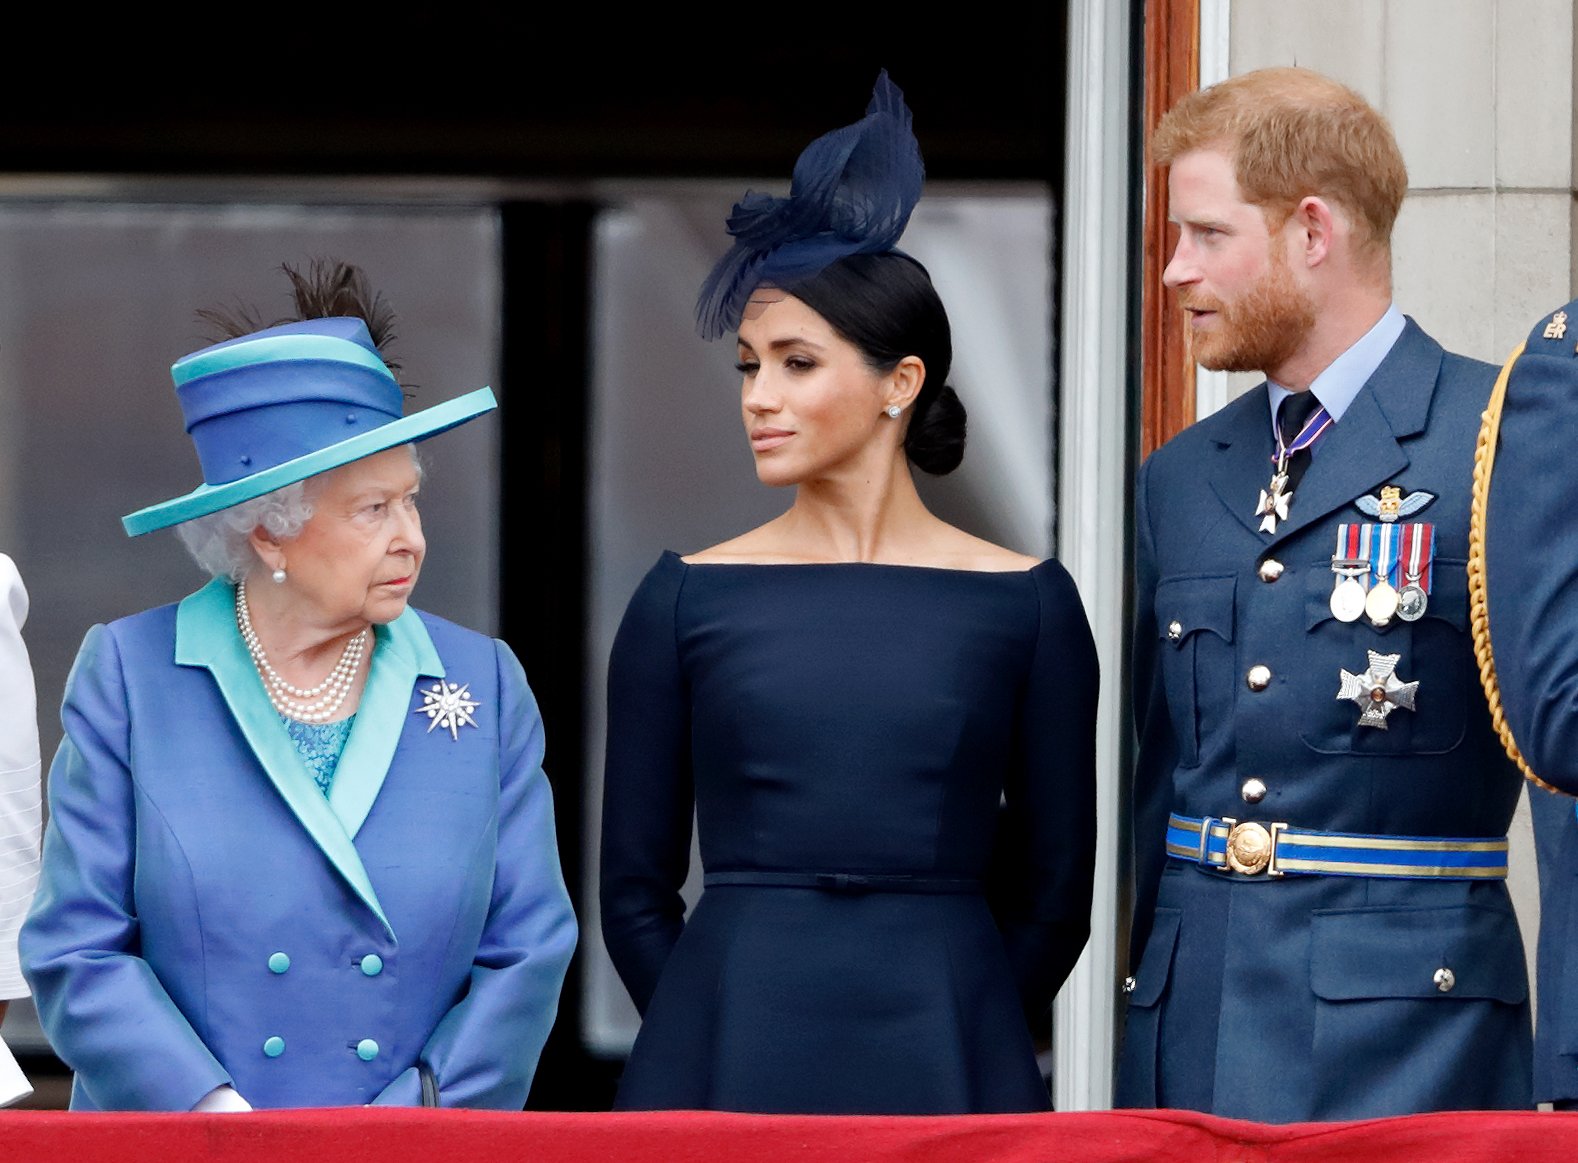 Queen Elizabeth II, Meghan Markle, and Prince Harry watch a flypast to commemorate the centenary of the Royal Air Force from the balcony of Buckingham Palace in 2018 in London, England.